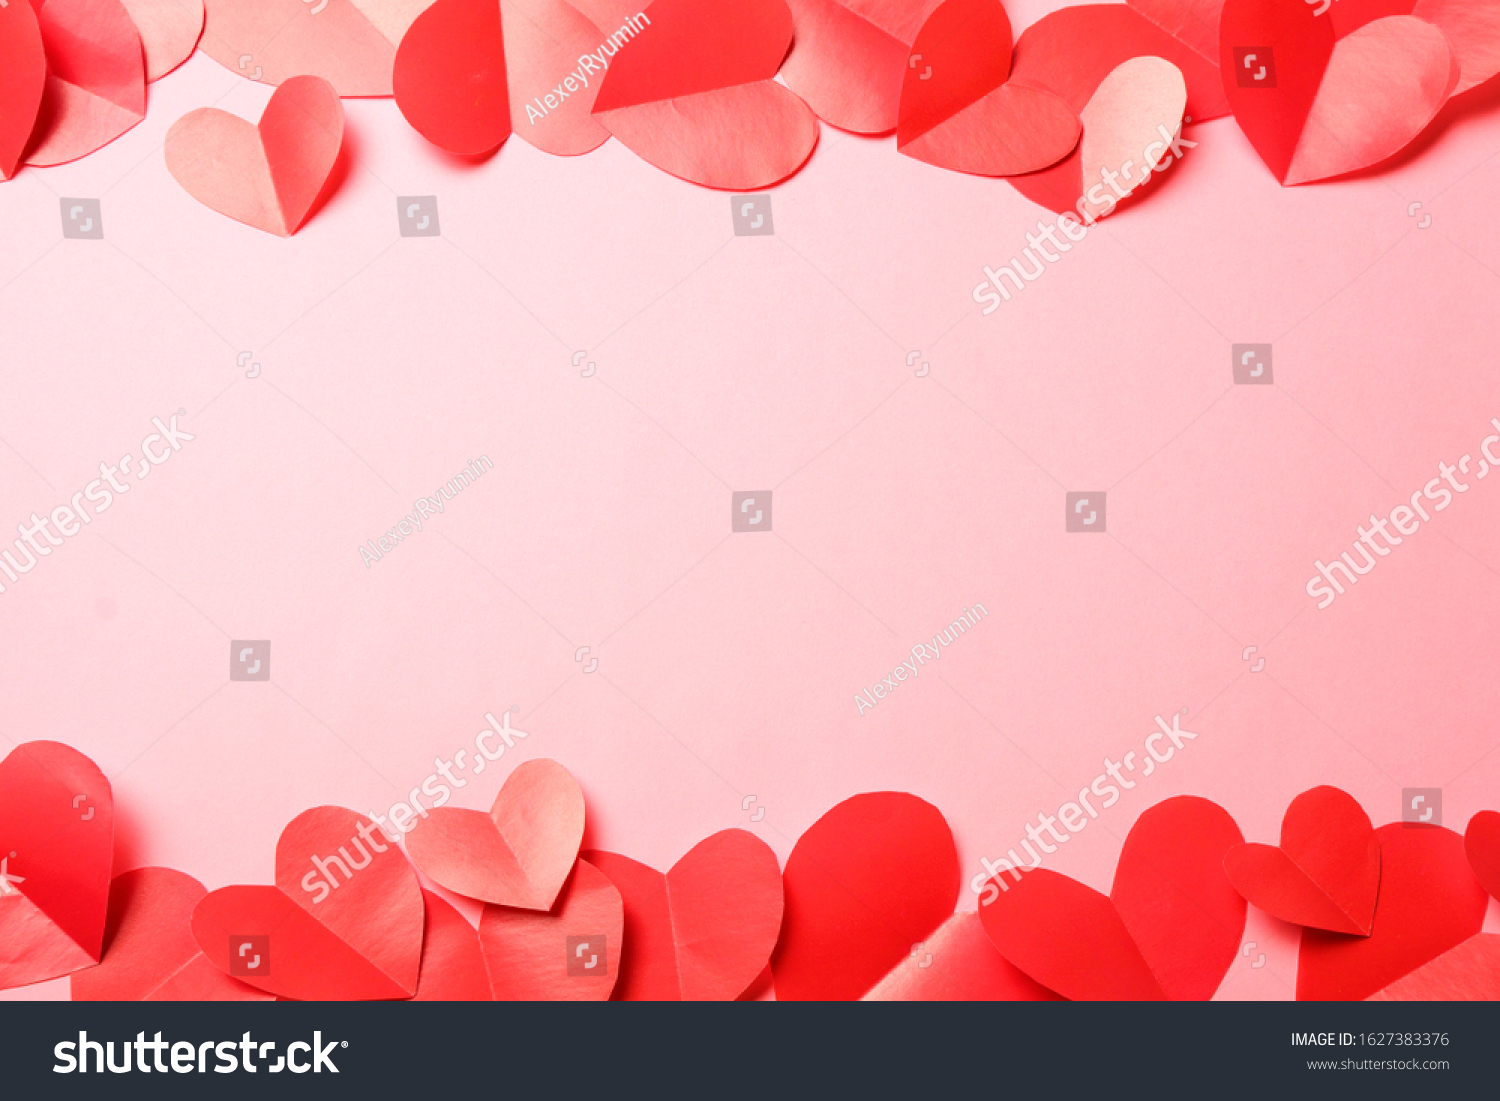 Cut out of red paper hearts on pink background. Good Valentines day, Womans day, love, romantic or wedding composition with free space for custom text for banner, congratulation, card, offer, flyer, advertising, invitation.